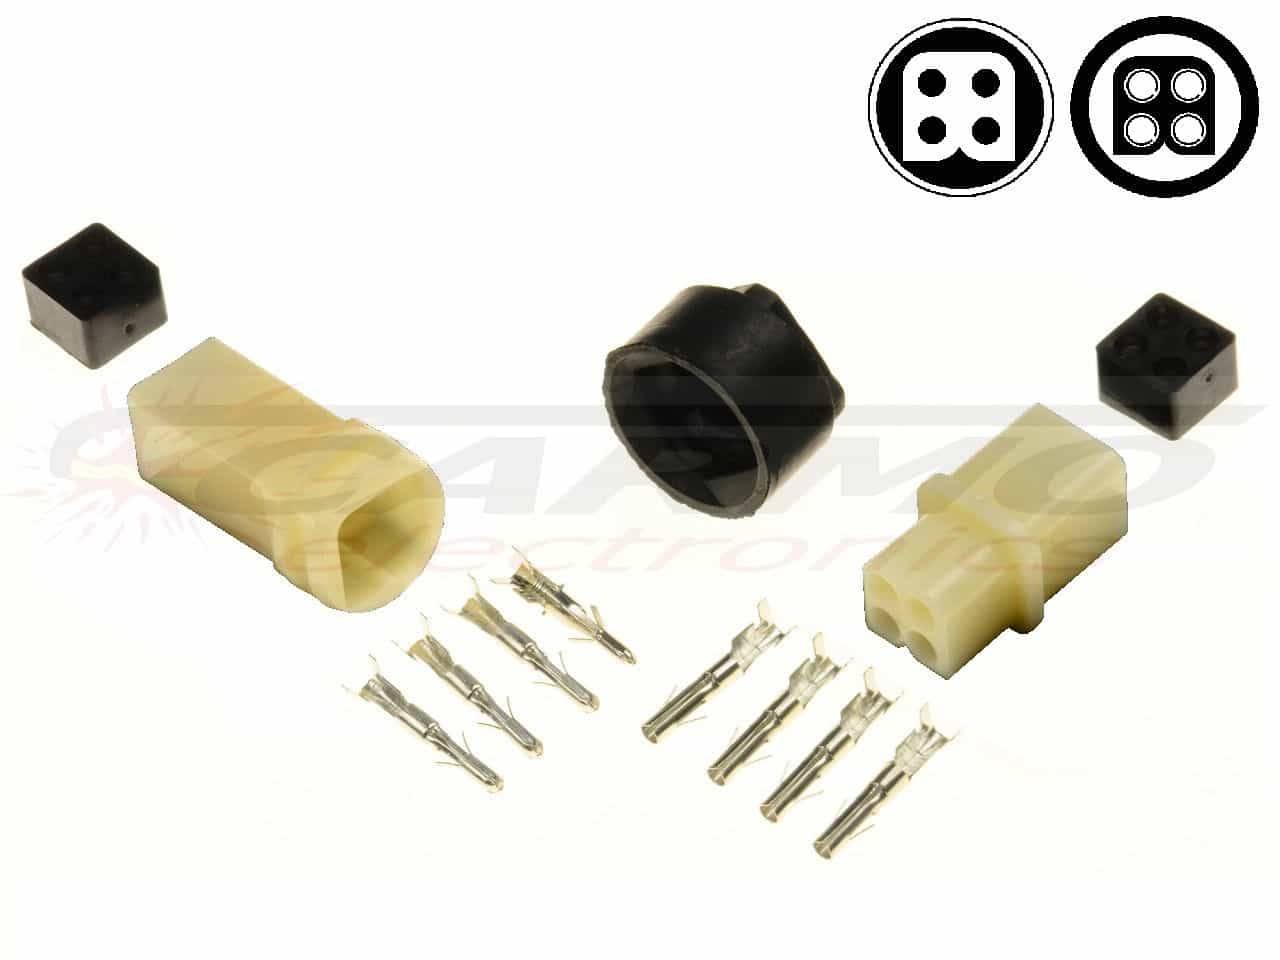 4 pin YPC Sealed connector set - off road bike connector - Click Image to Close